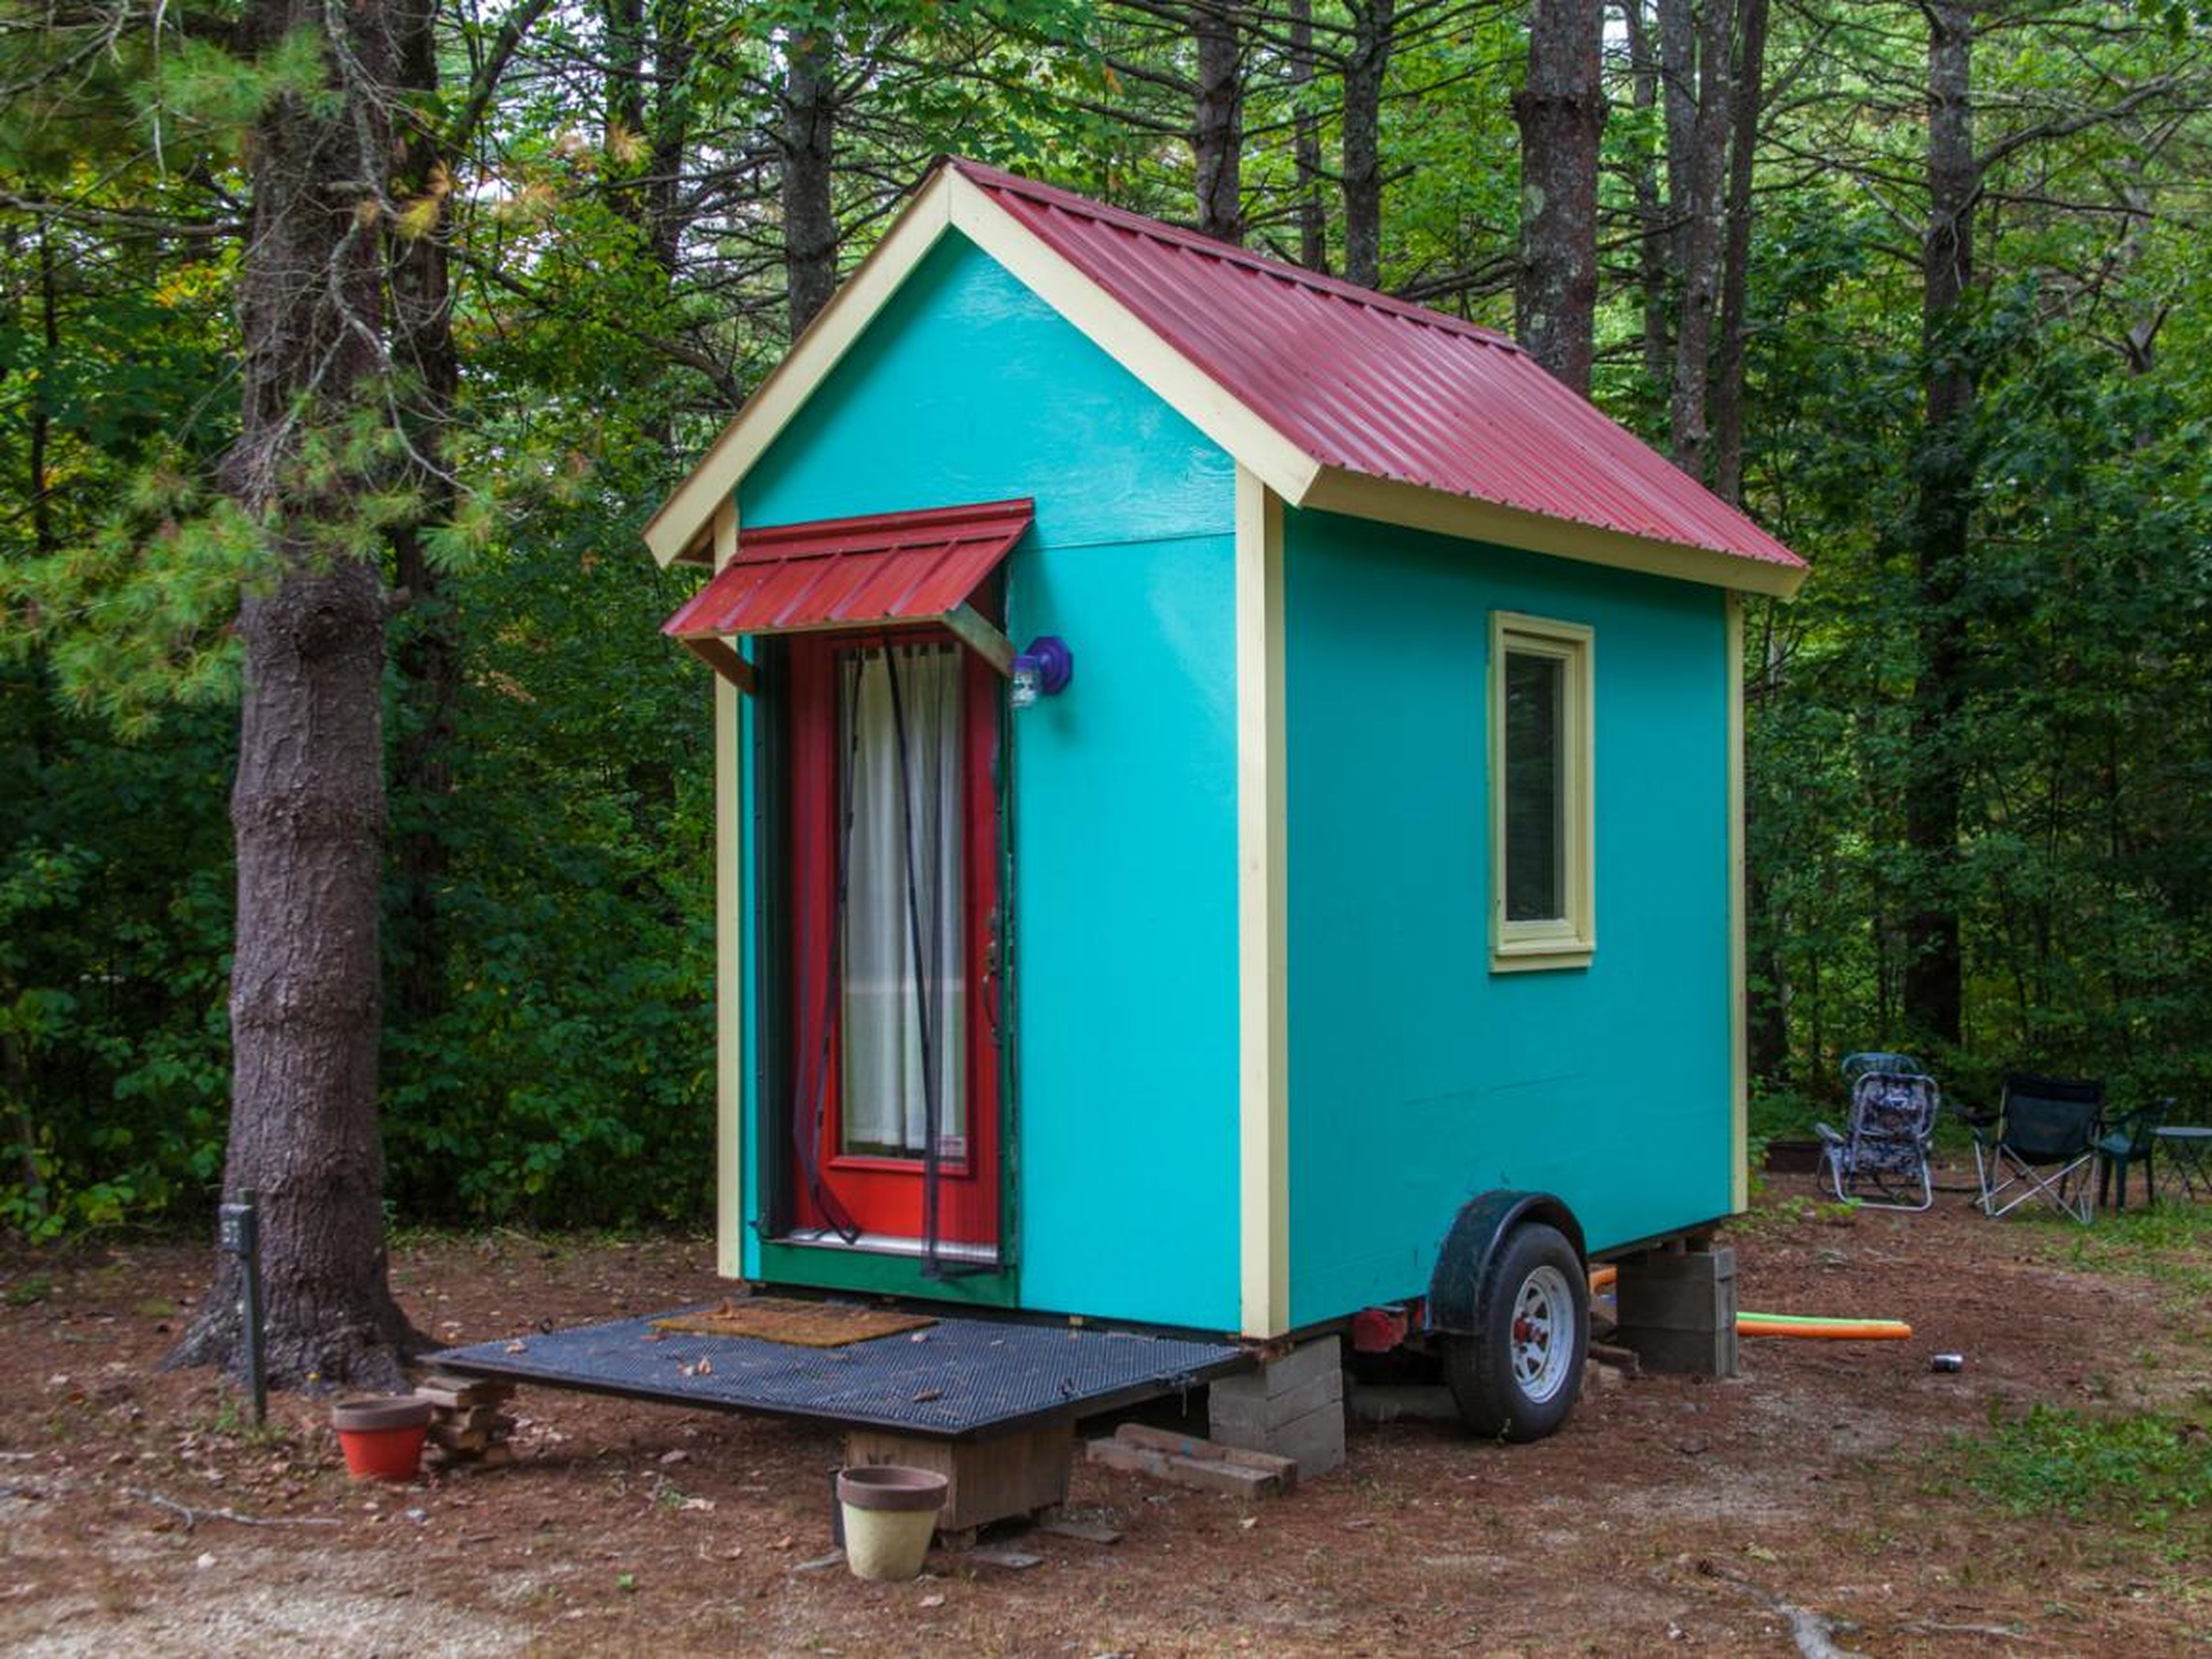 "Here, on the inside, we have found small not so beautiful after all," wrote tiny home dweller Gene Tempest in The New York Times. "Like the silent majority of other middling or poor urban dwellers in expensive cities, we are